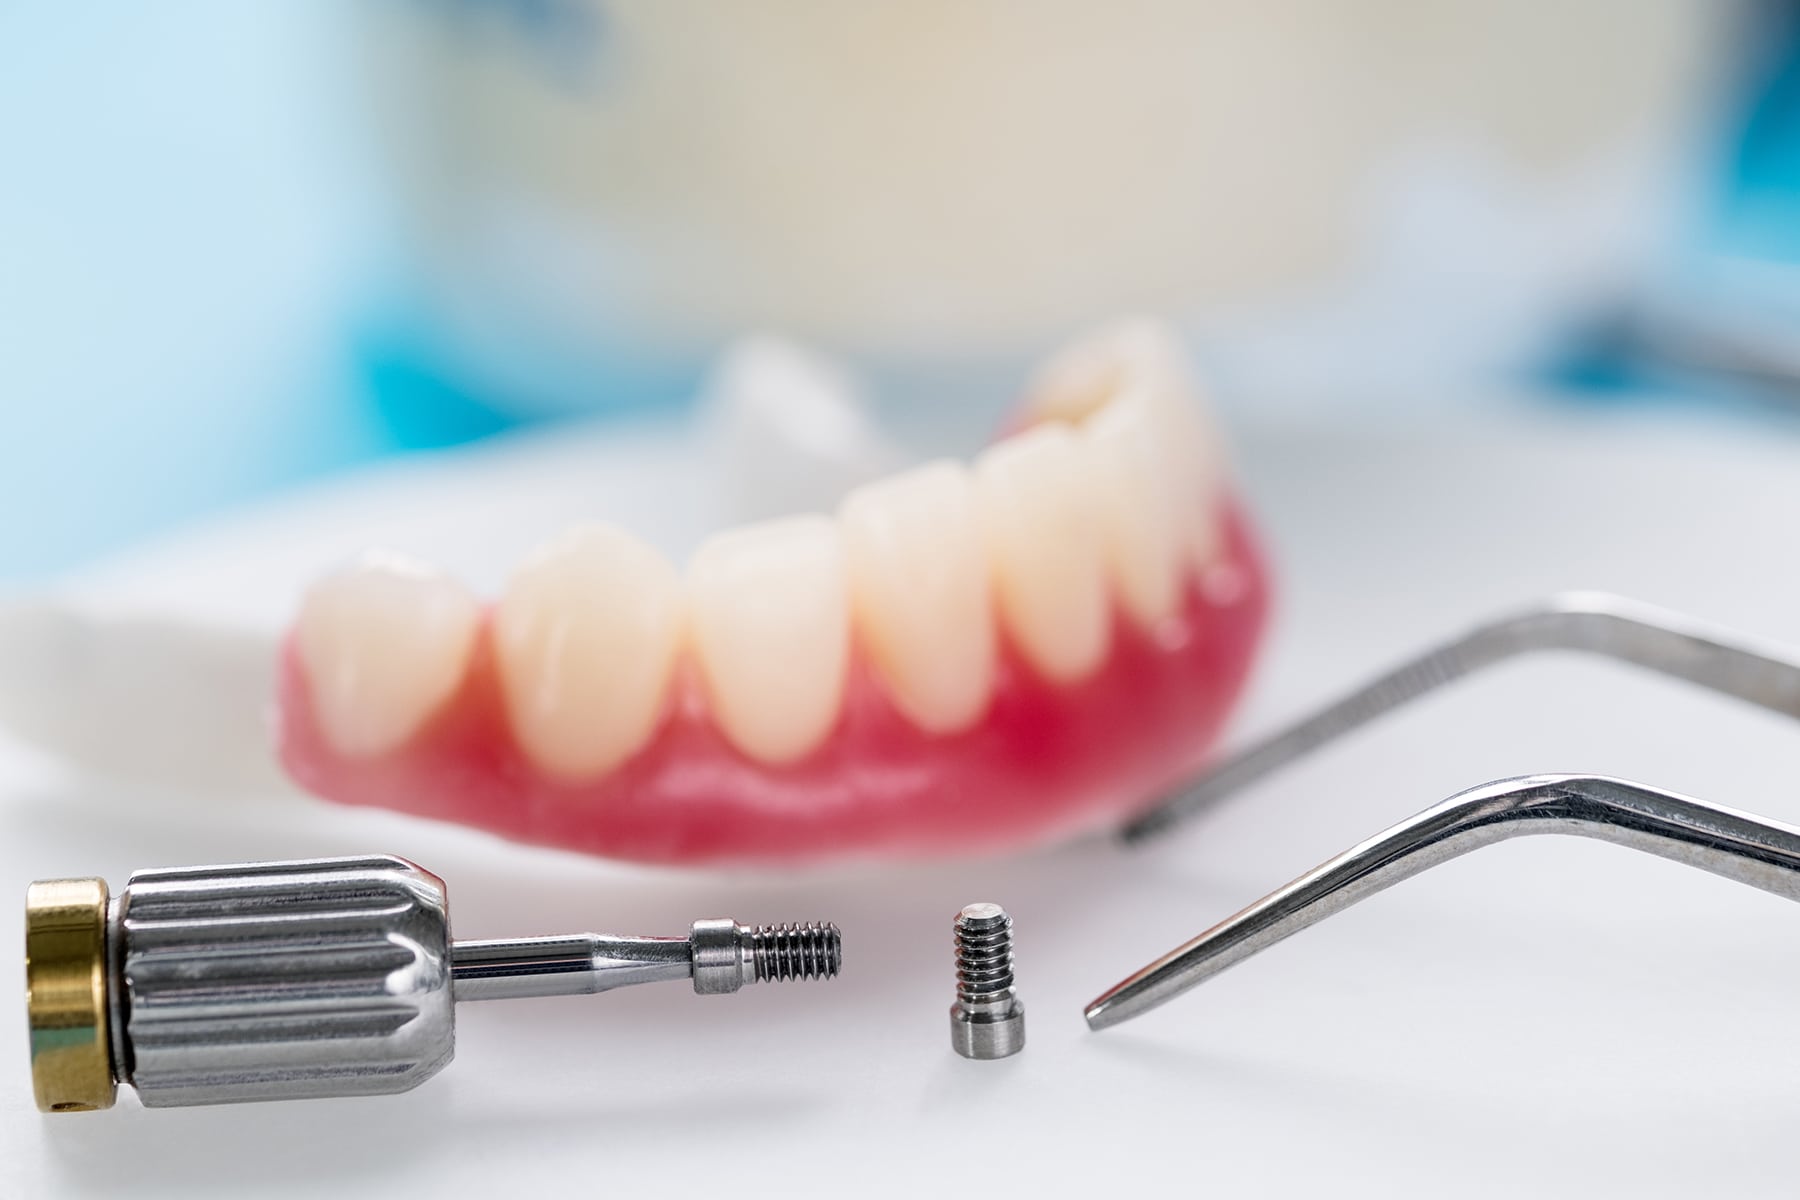 Implant dentures available at Schmitt Dental in Tennessee